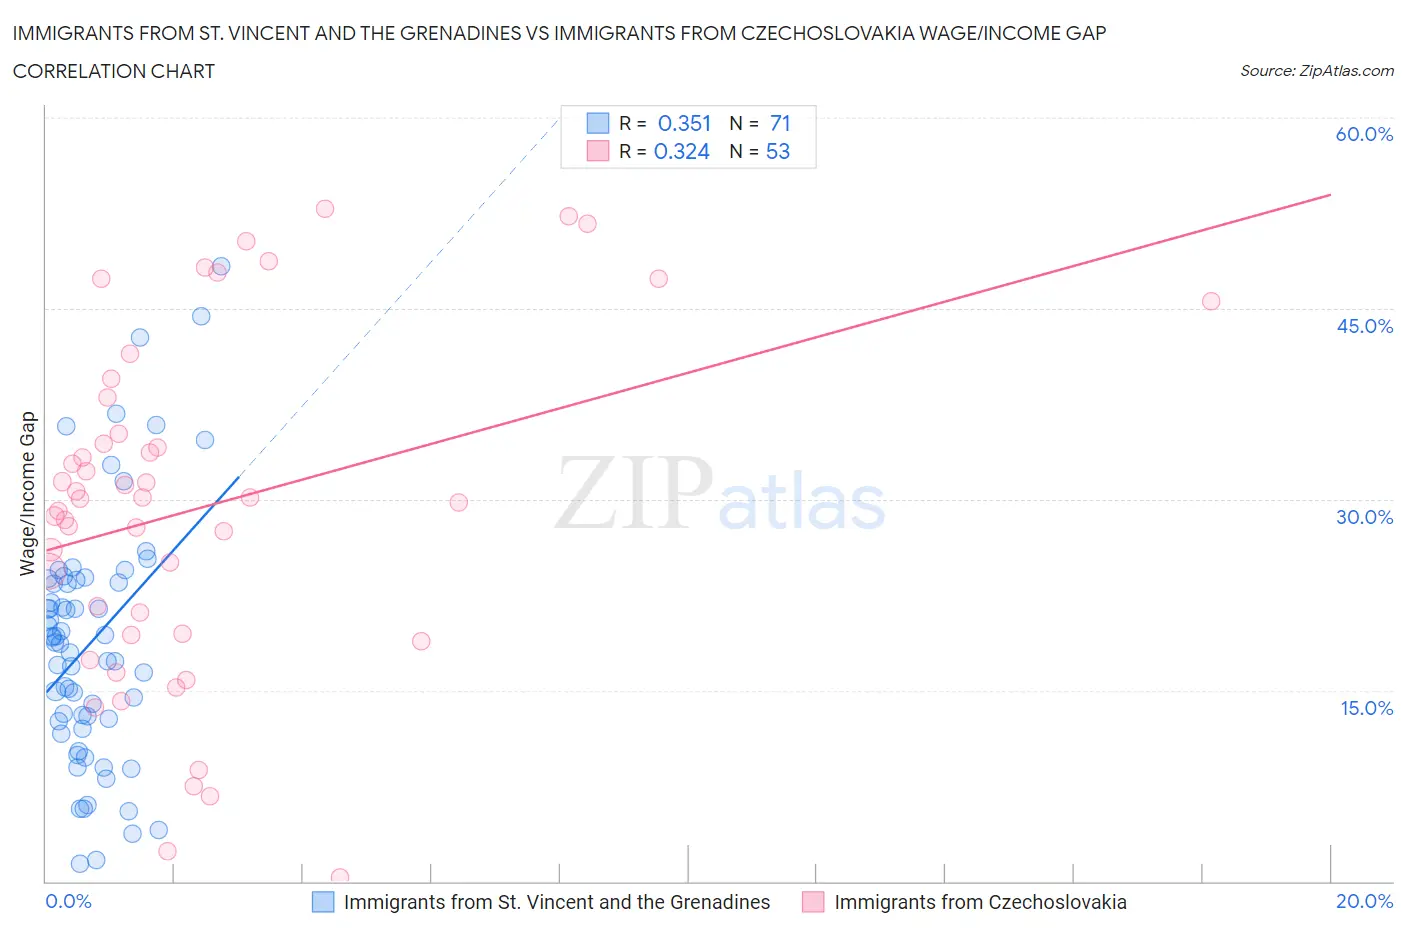 Immigrants from St. Vincent and the Grenadines vs Immigrants from Czechoslovakia Wage/Income Gap